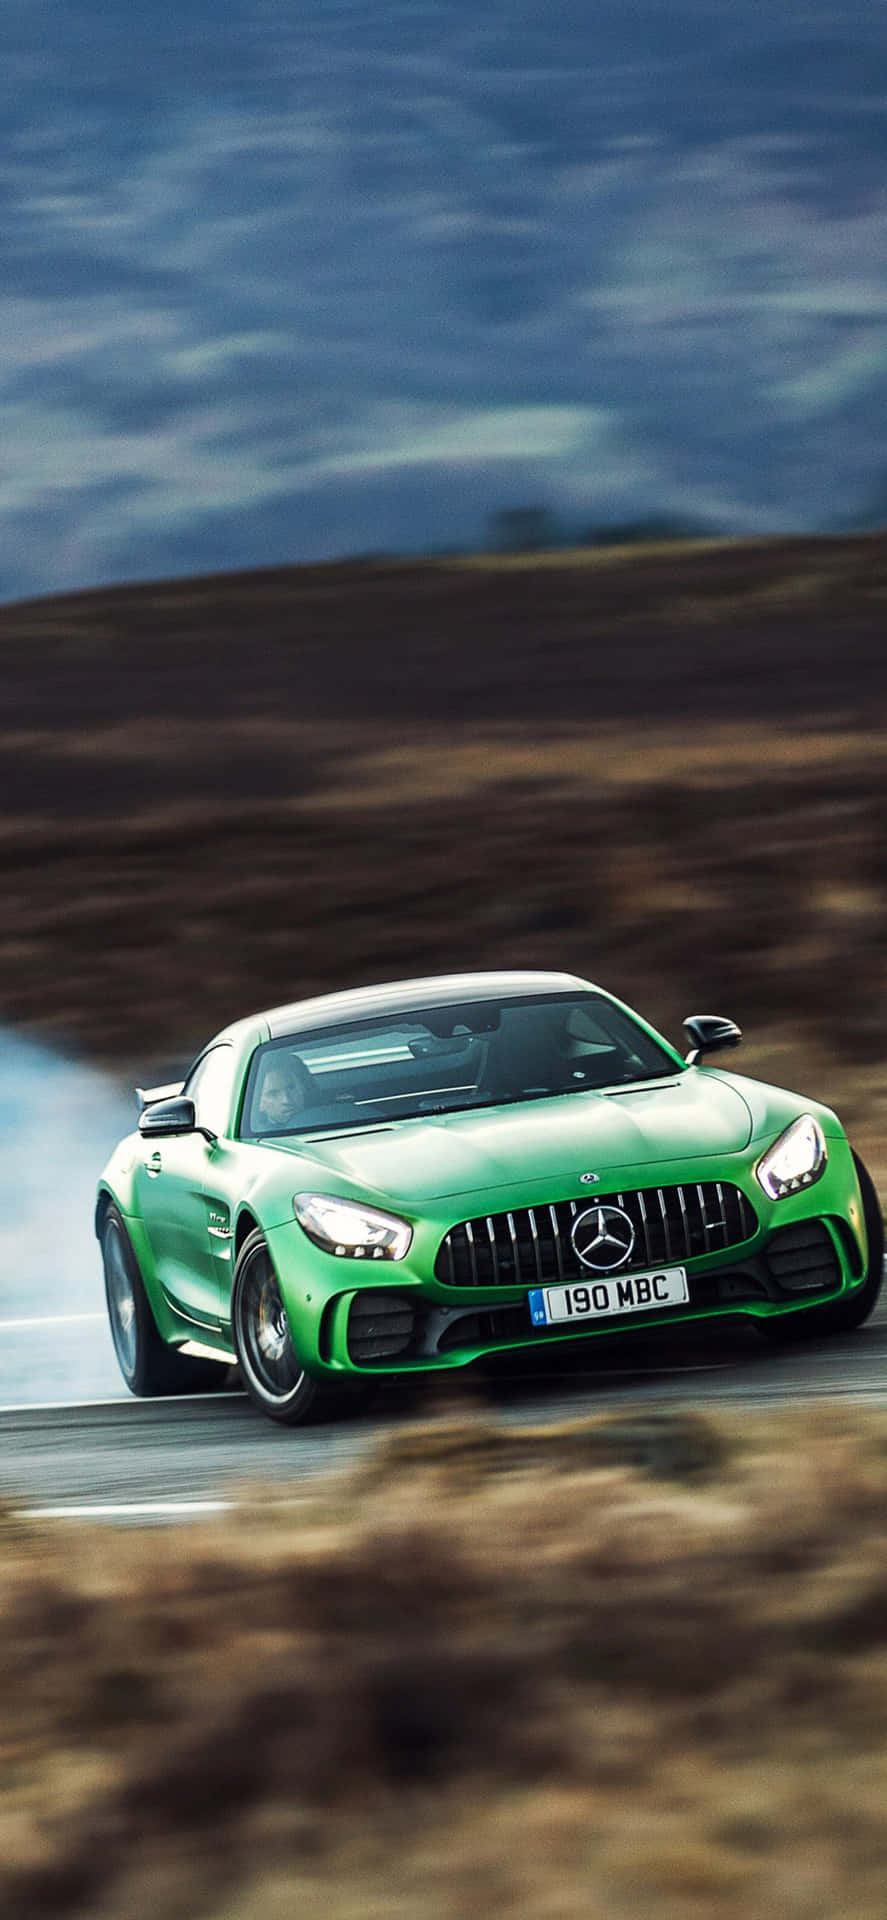 Green Mercedes Gts On The Road Wallpaper